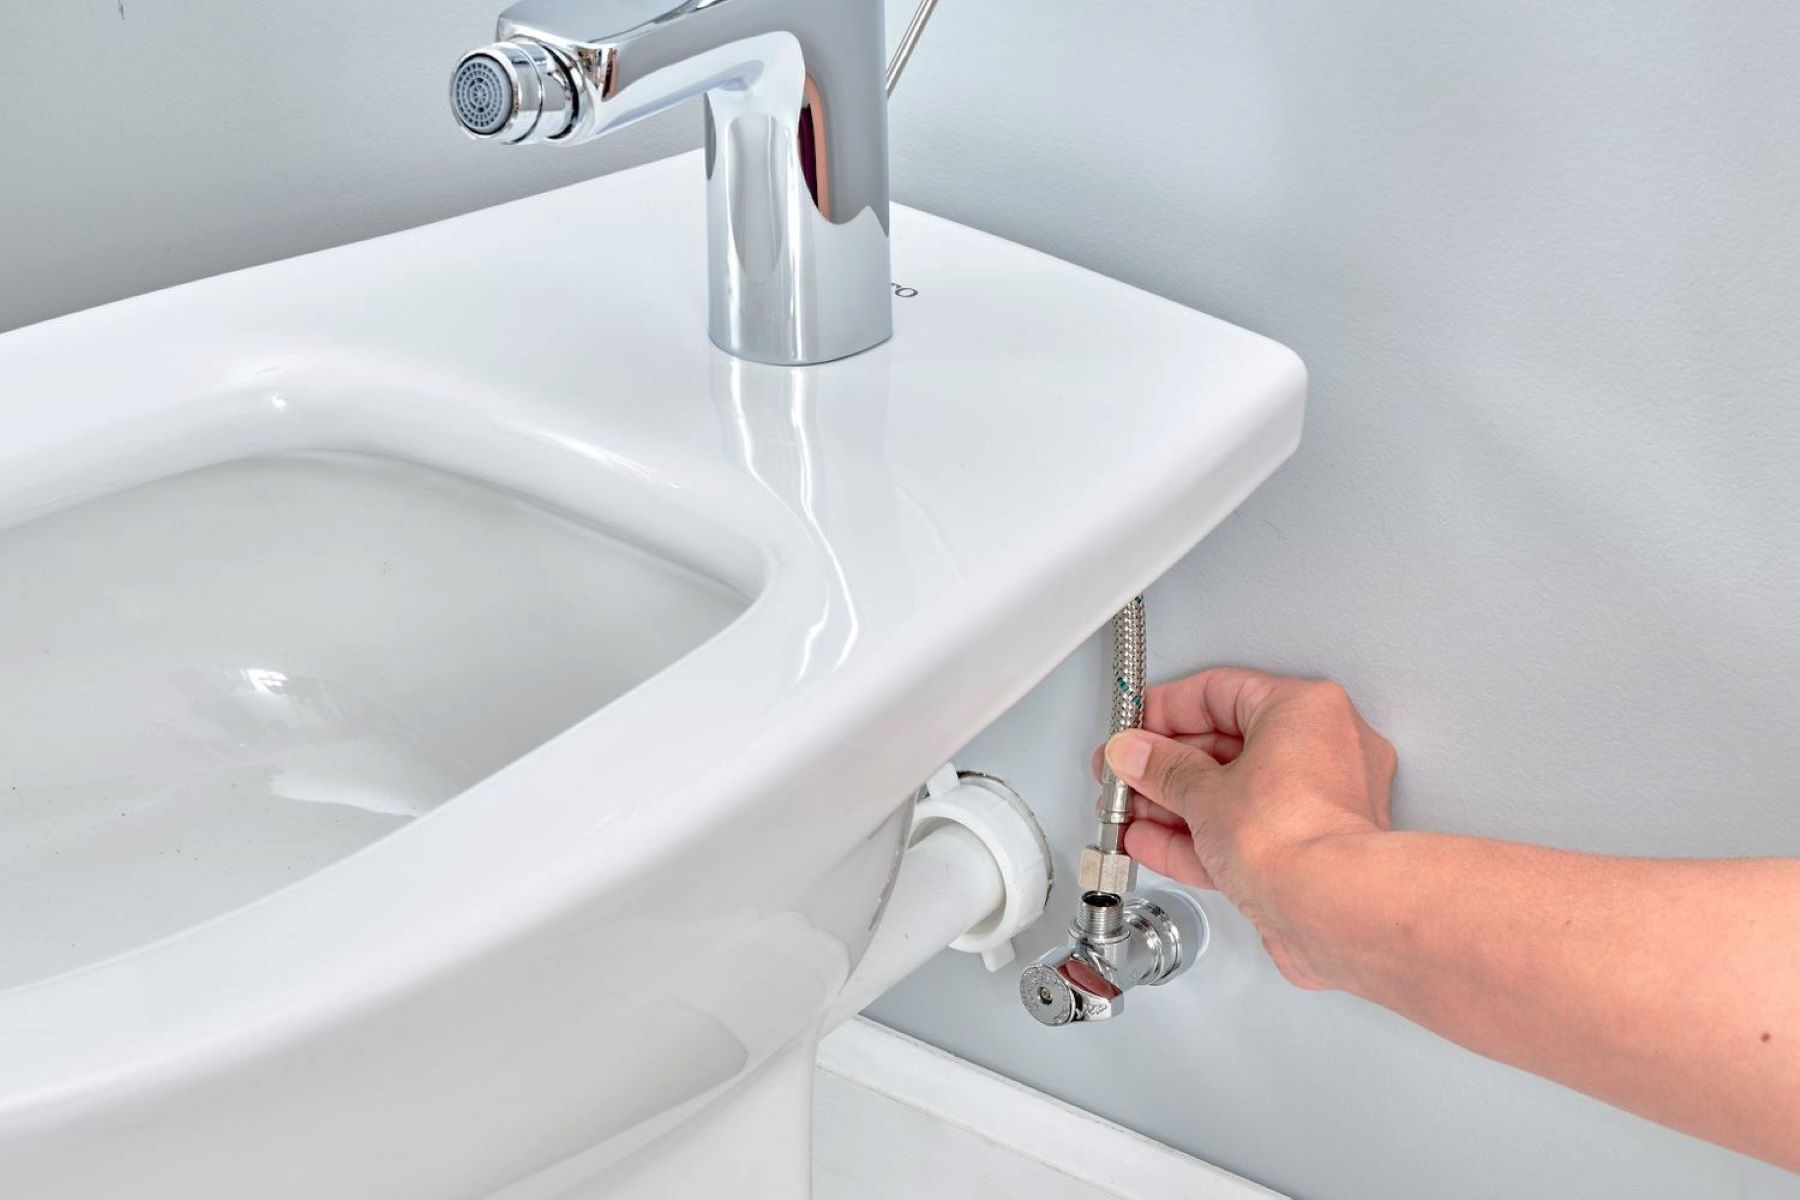 How To Hook Up Bidet To Hot Water